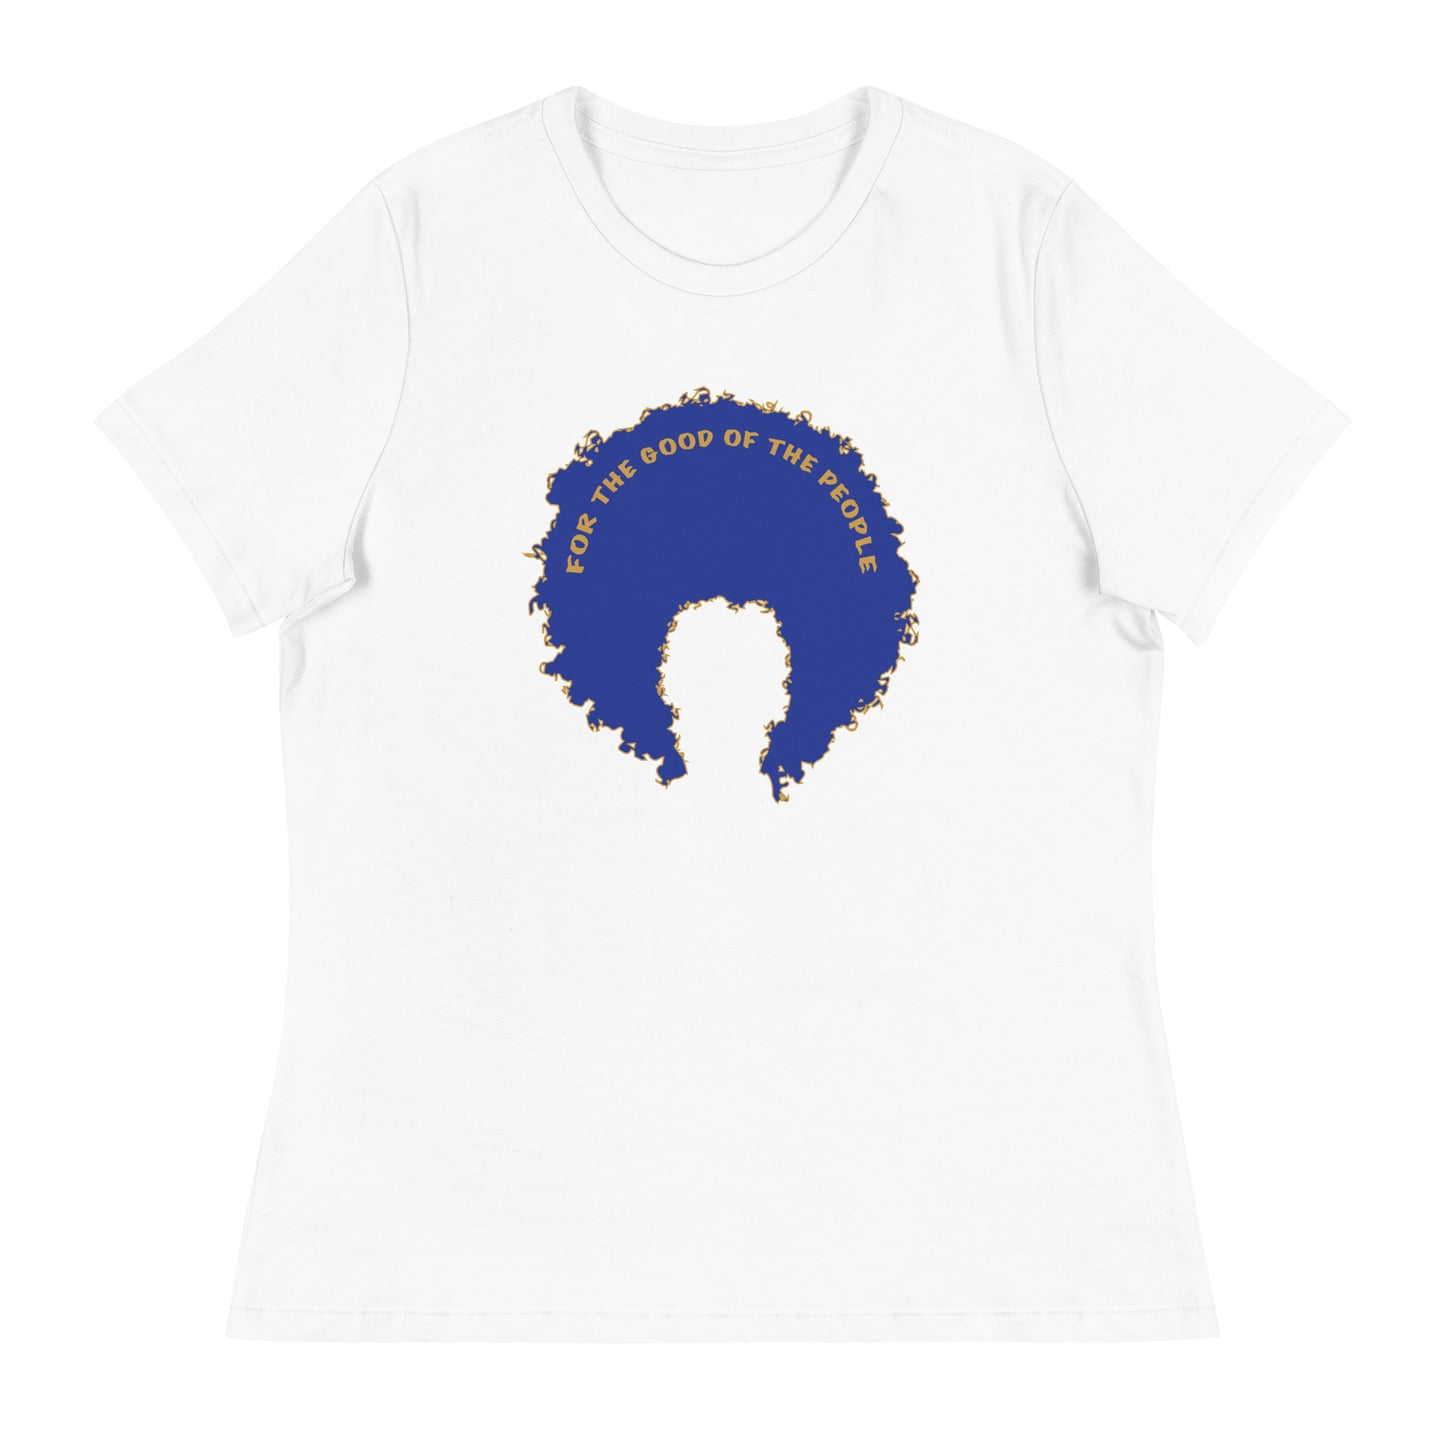 White women's tee with blue afro graphic trimmed in gold with for the good of the people in gold on the inside top of the afro.